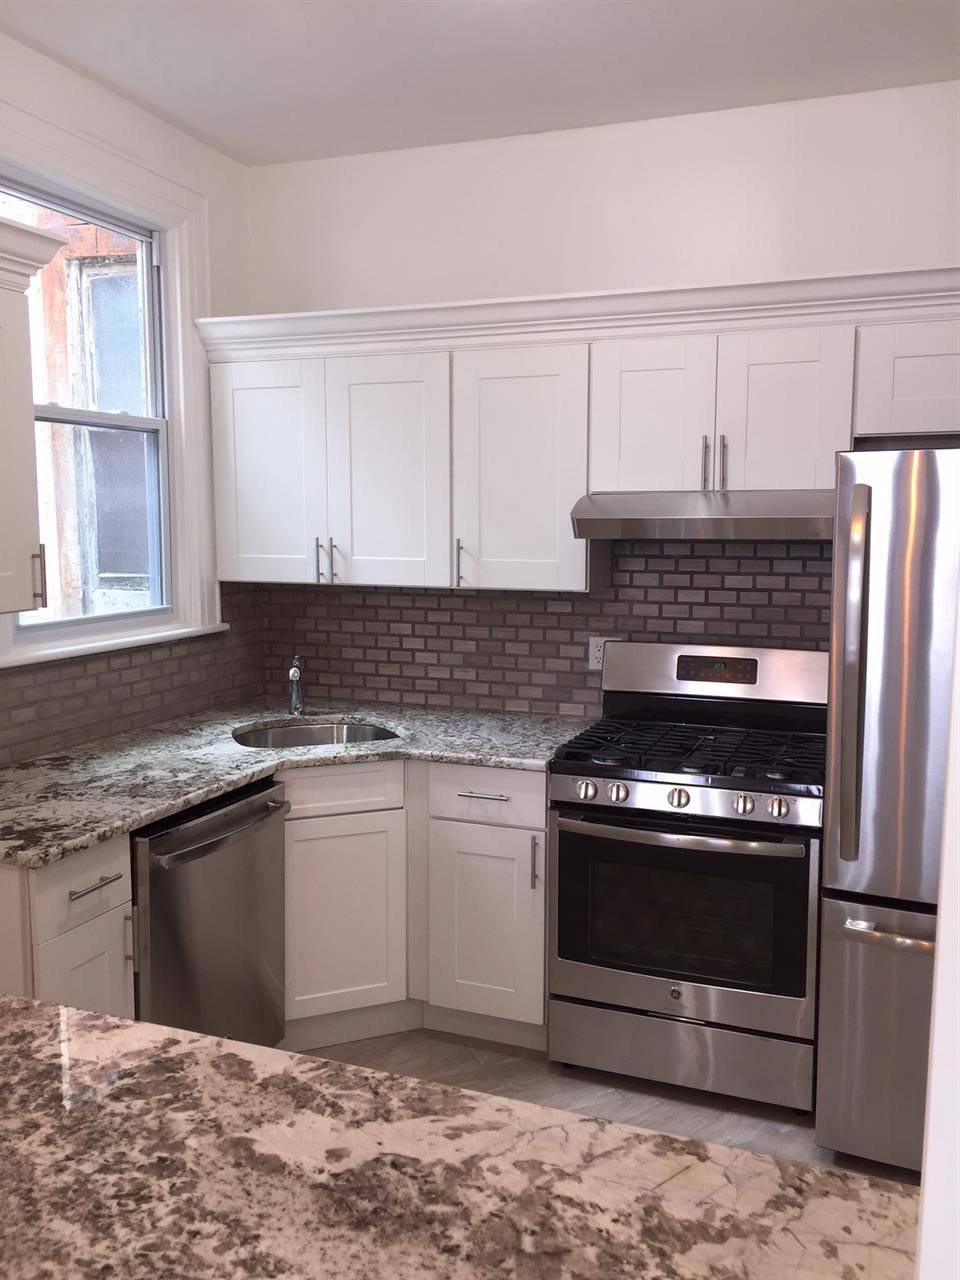 Beautifully renovated 1B/1B condo located in the heart of Jersey City Heights